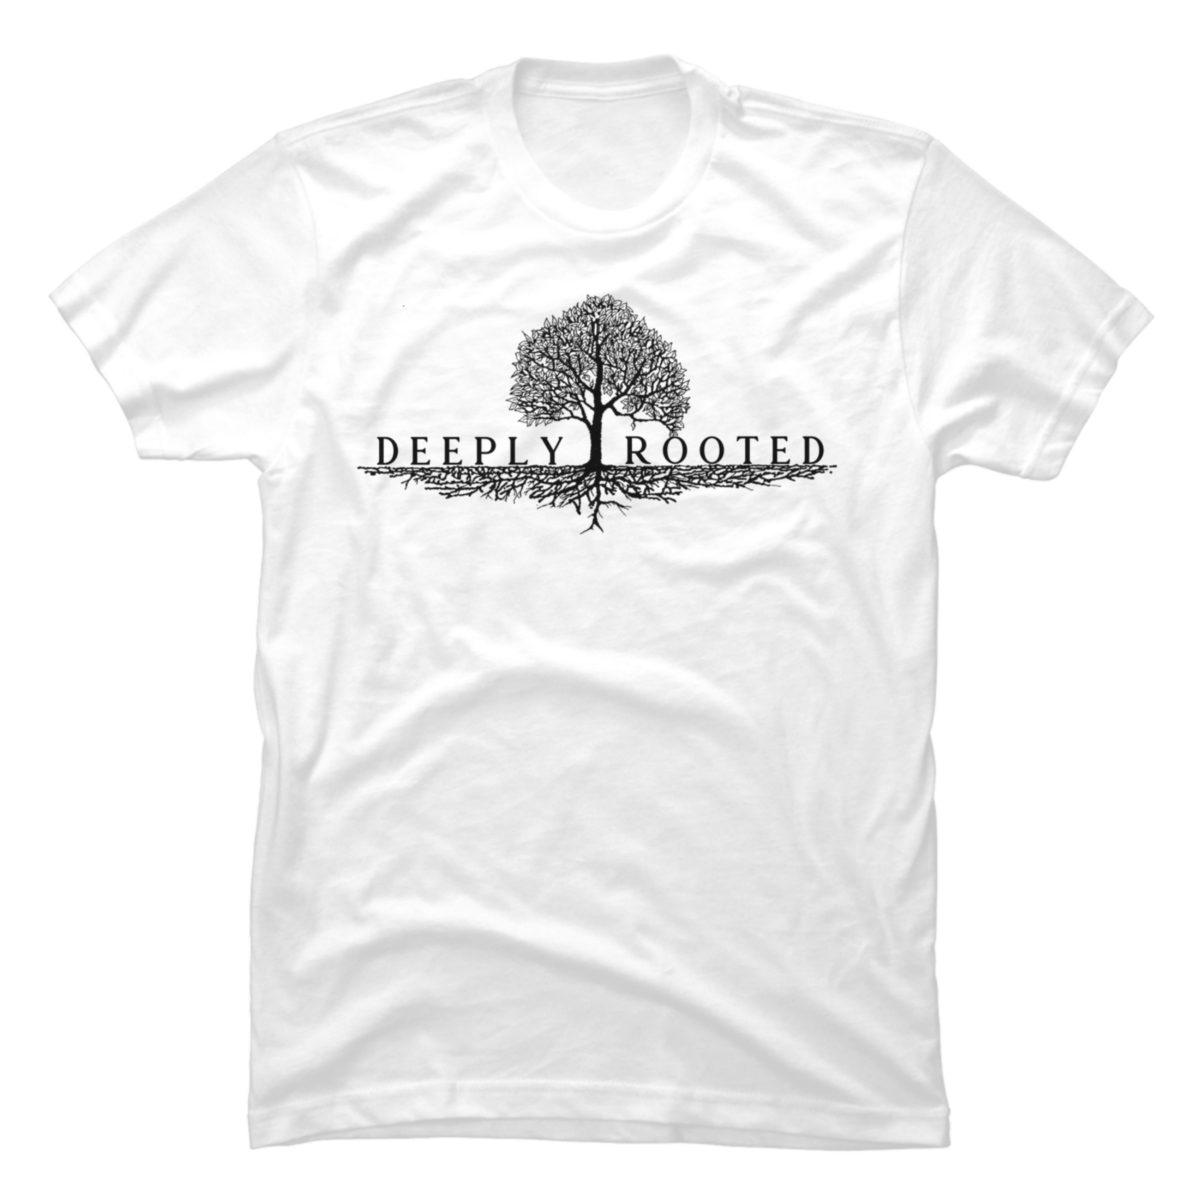 rooted t shirts